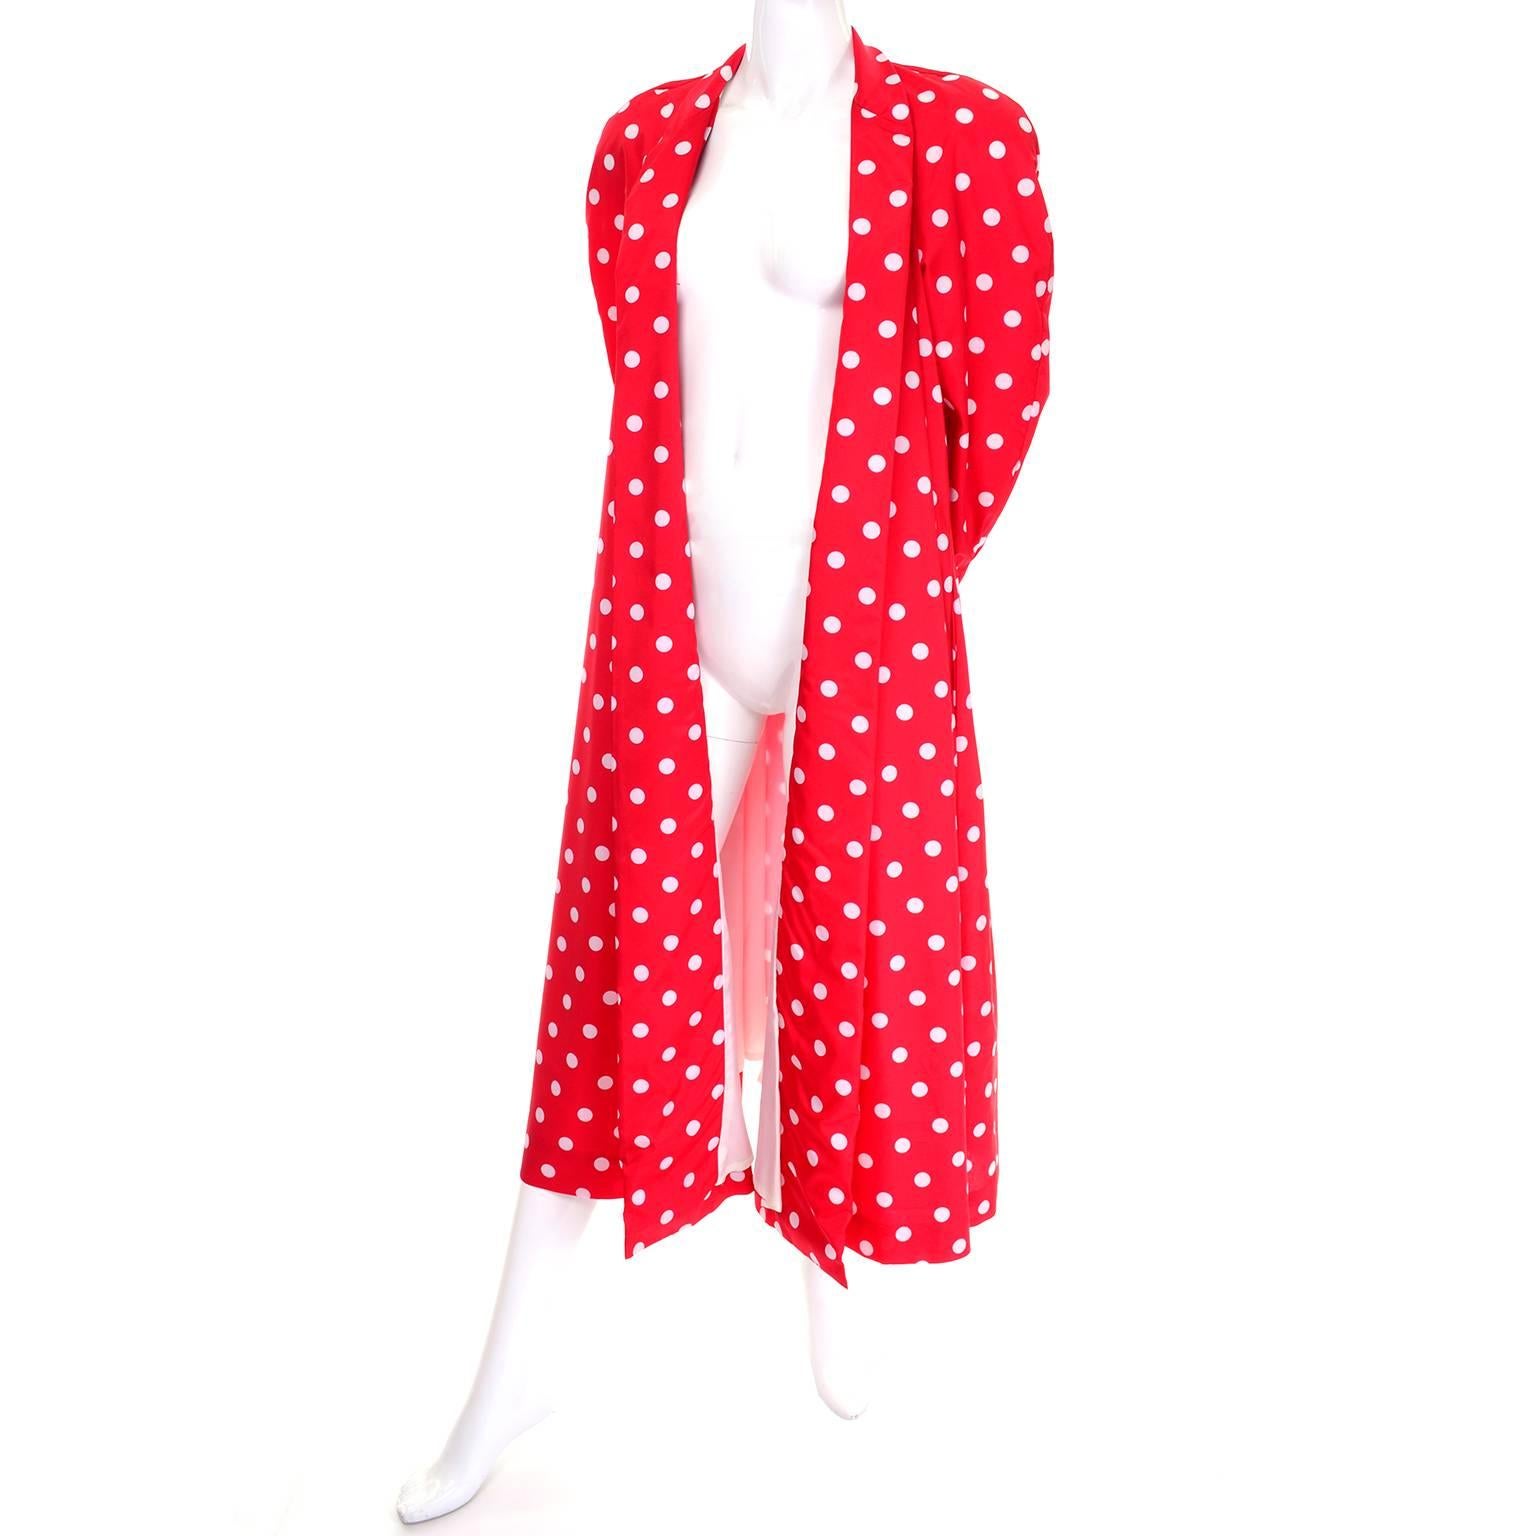 This is a fabulous 1980's Victor Costa for Bergdorf Goodman red summer evening coat with white polka dots. This lightweight open front coat has dramatic long raglan sleeves, puffy shoulder pads, and is fully lined in white. This coat can fit a